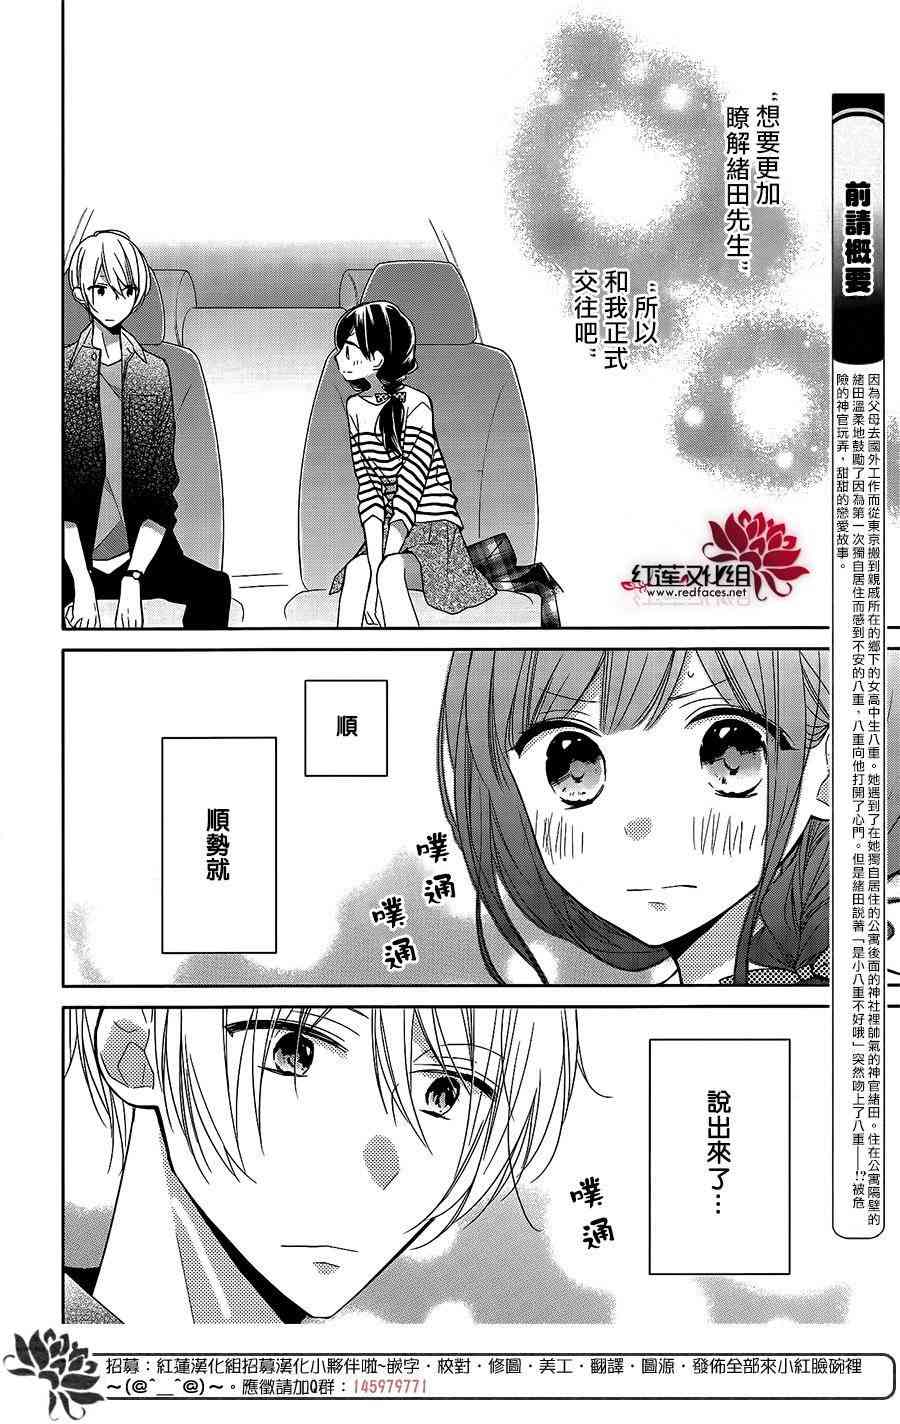 If given a second chance - 7話 - 2